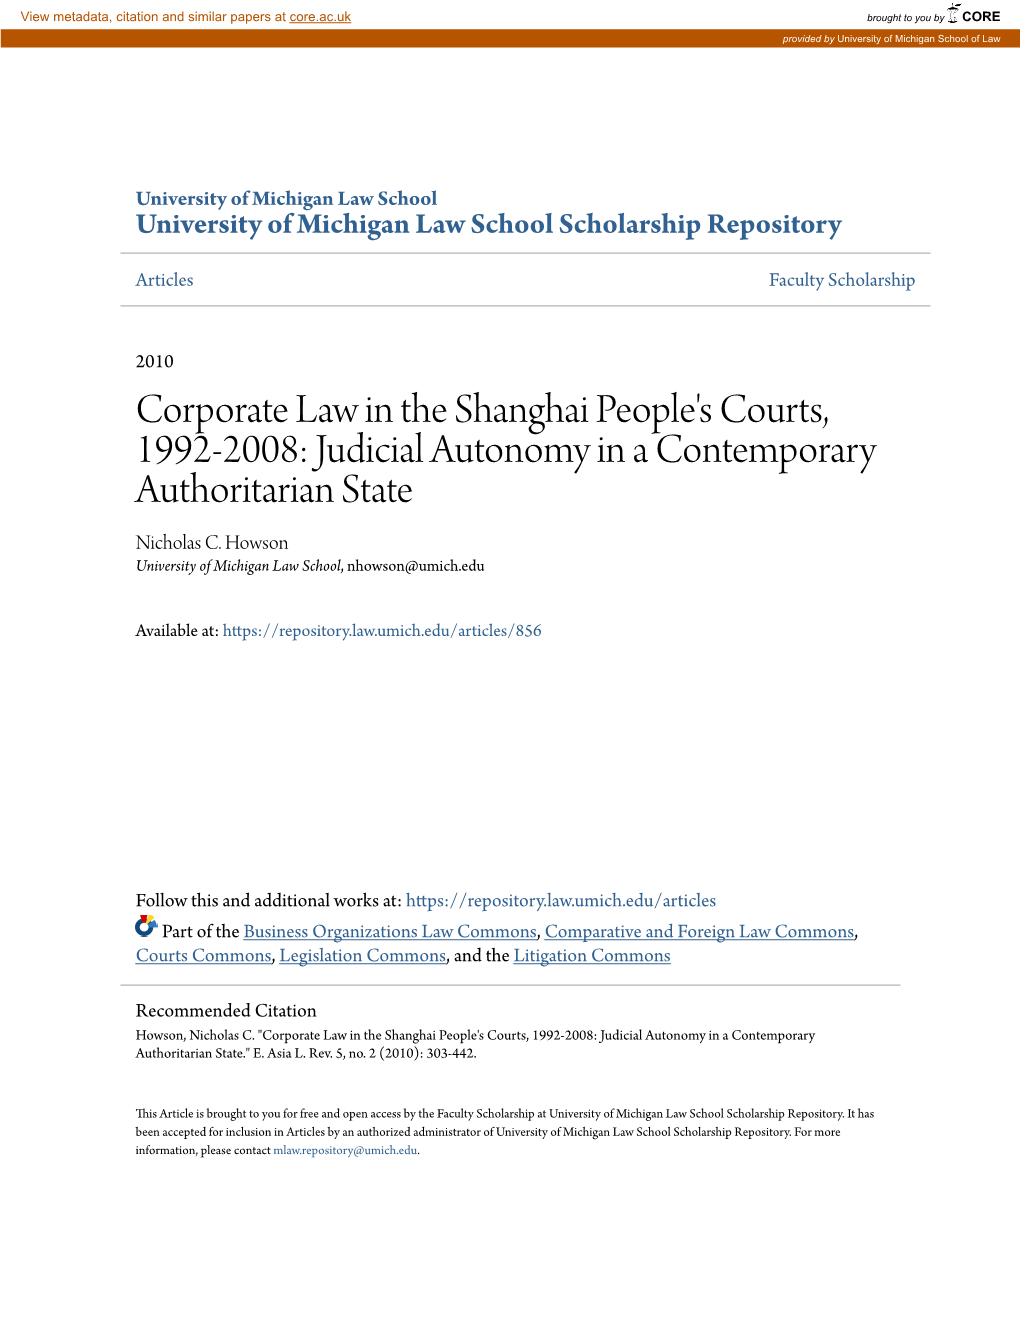 Corporate Law in the Shanghai People's Courts, 1992-2008: Judicial Autonomy in a Contemporary Authoritarian State Nicholas C